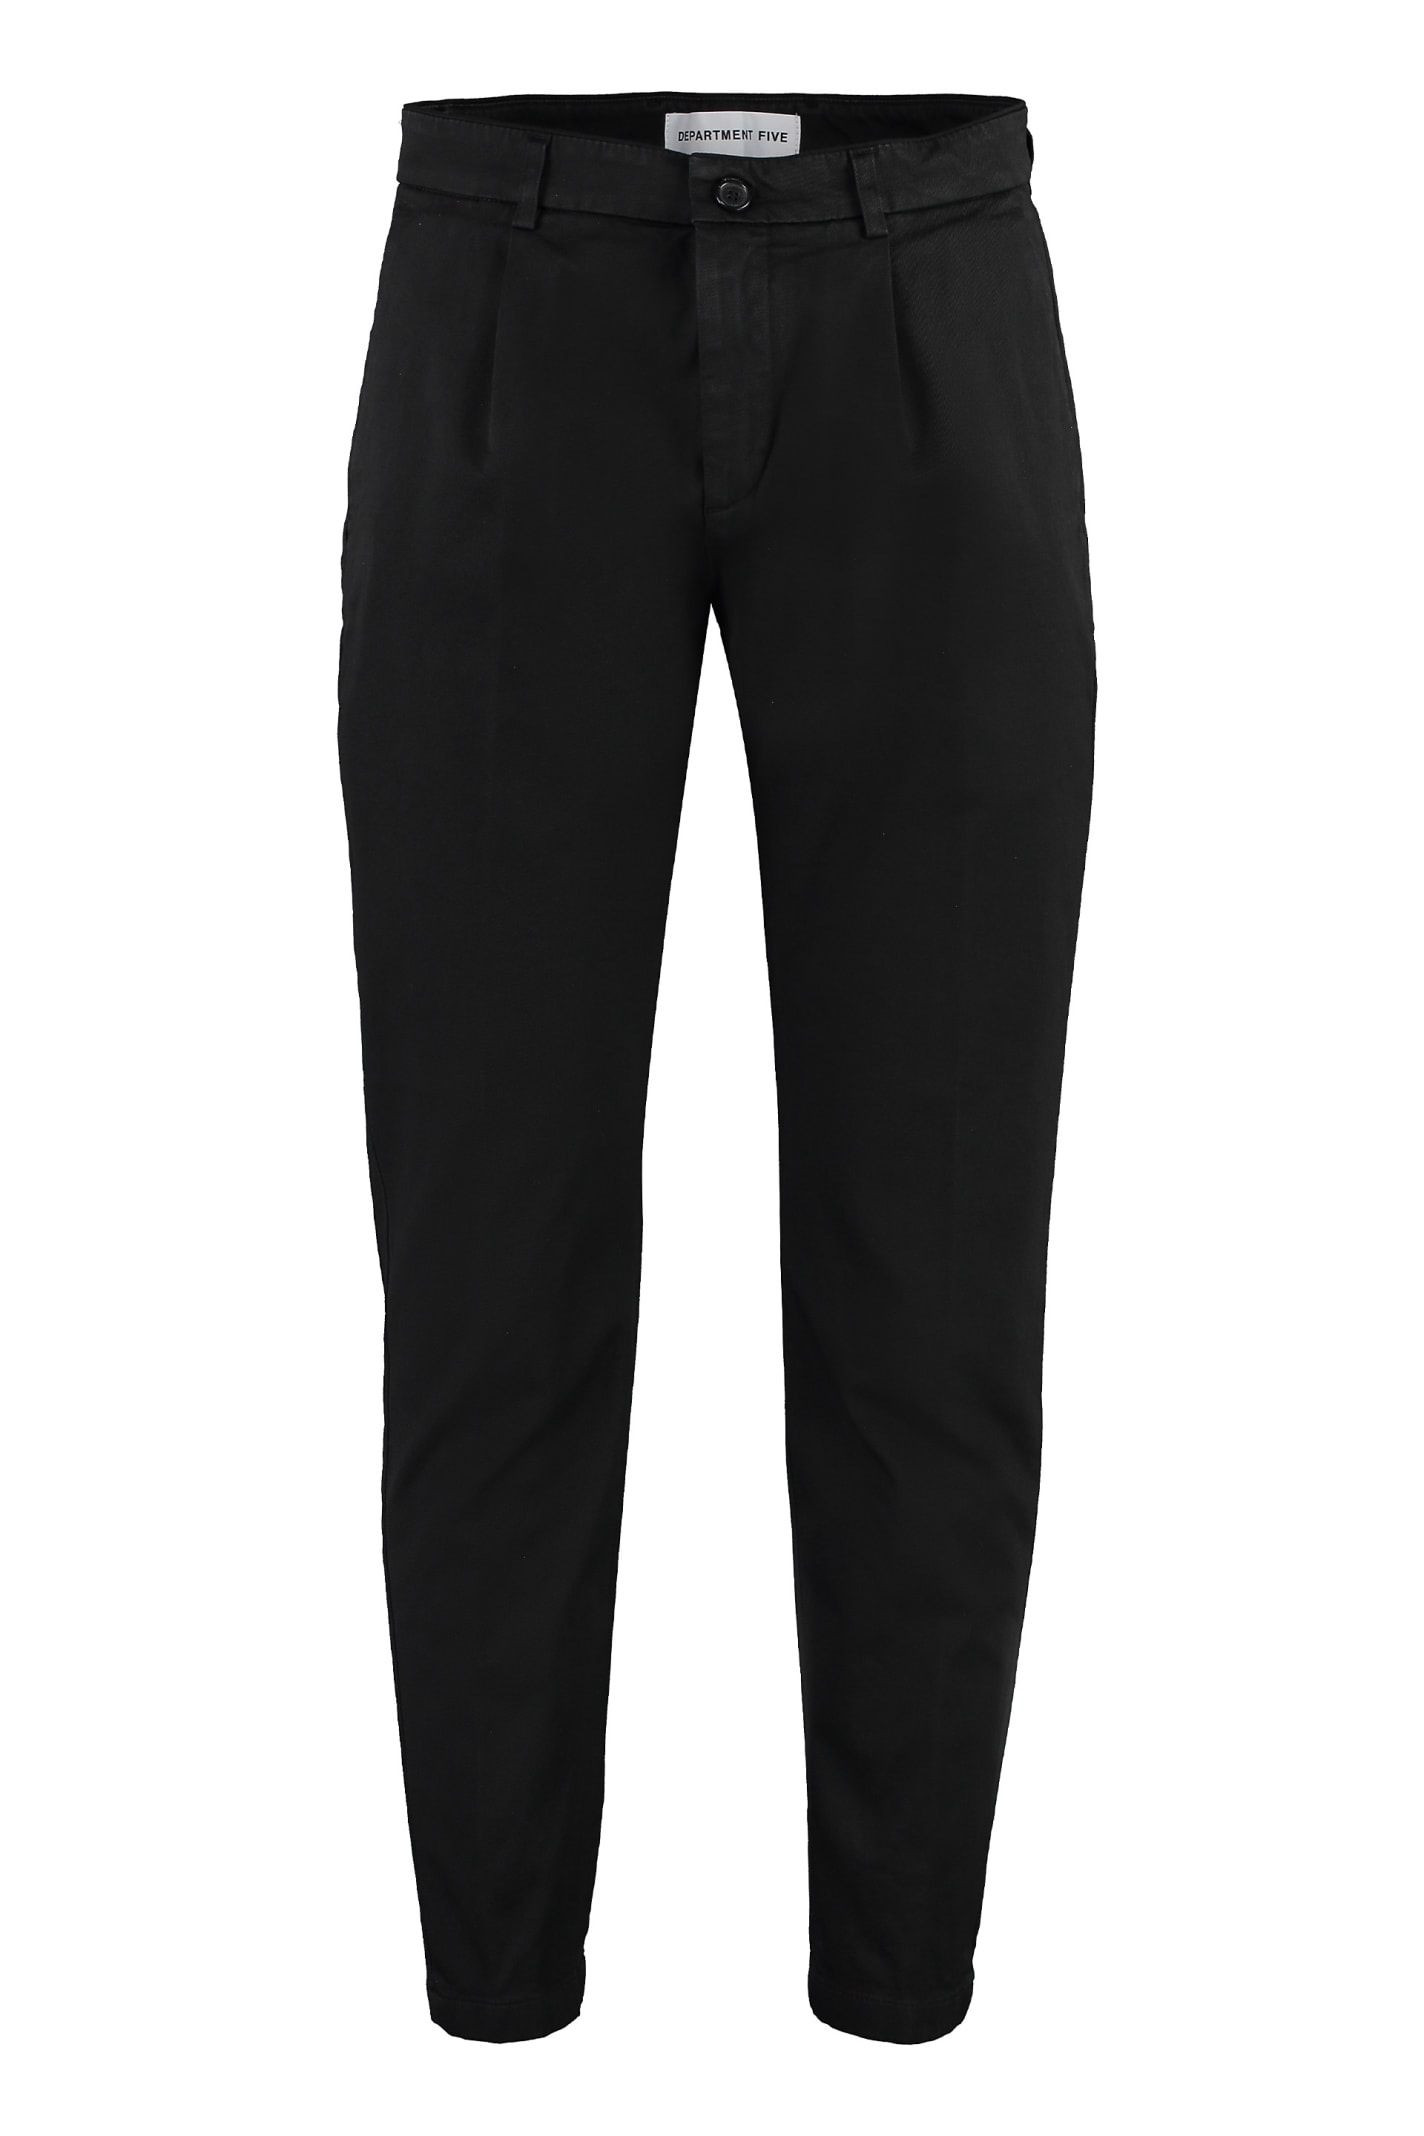 Shop Department Five Prince Chino Pants In Black